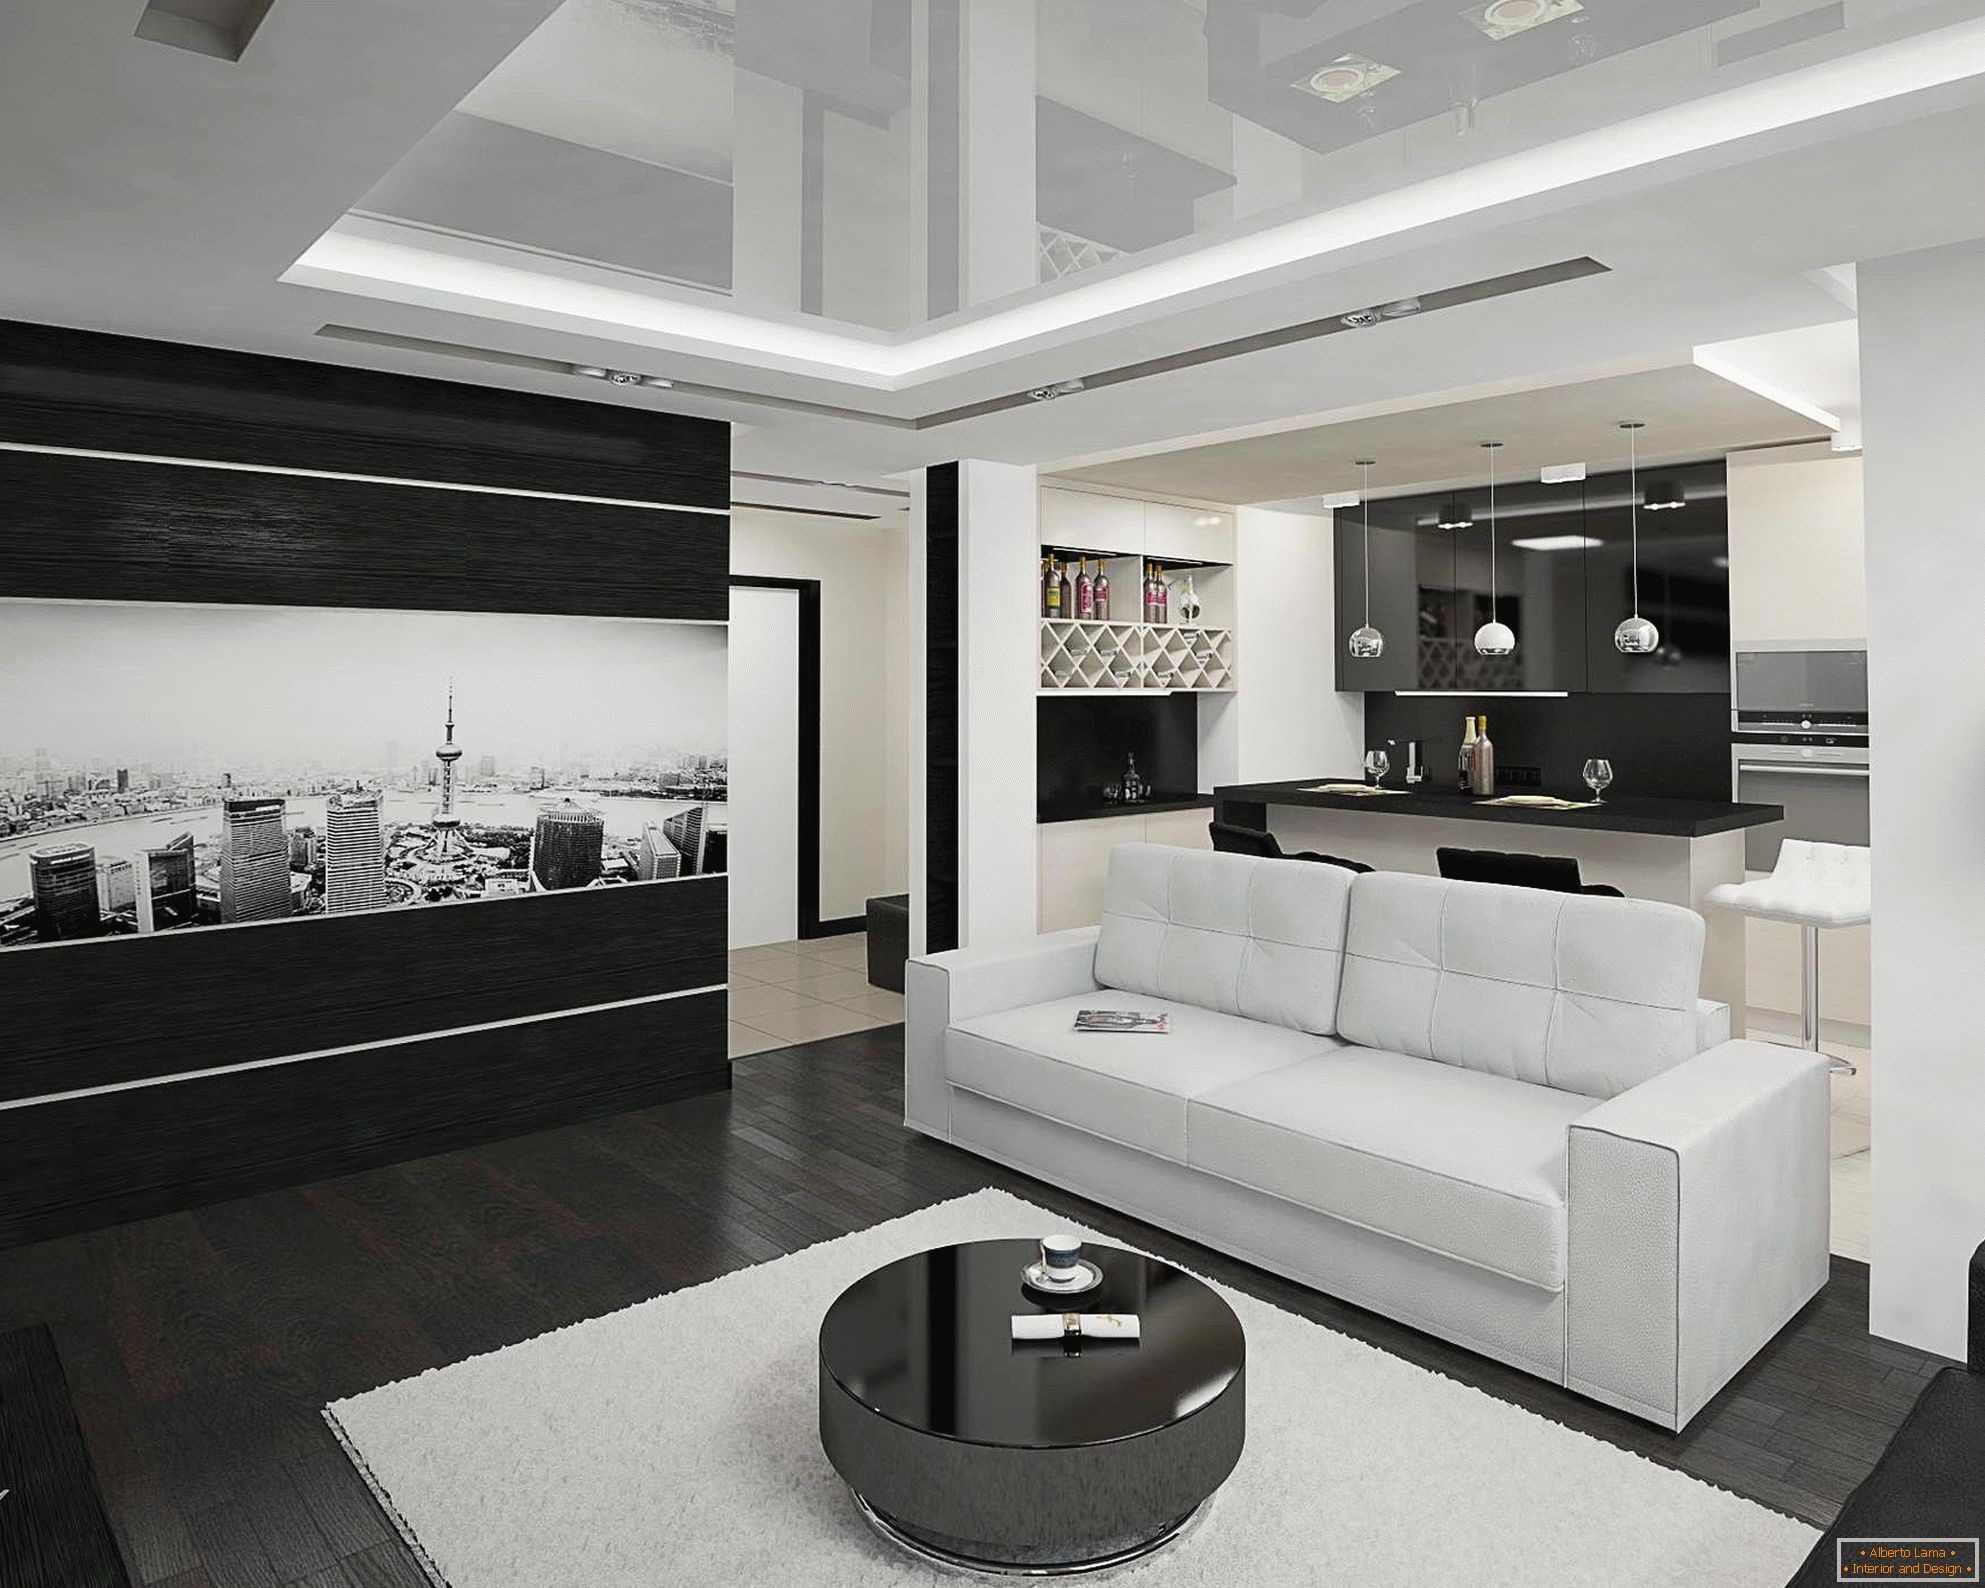 Black and white kitchen and living room interior on 20 square meters